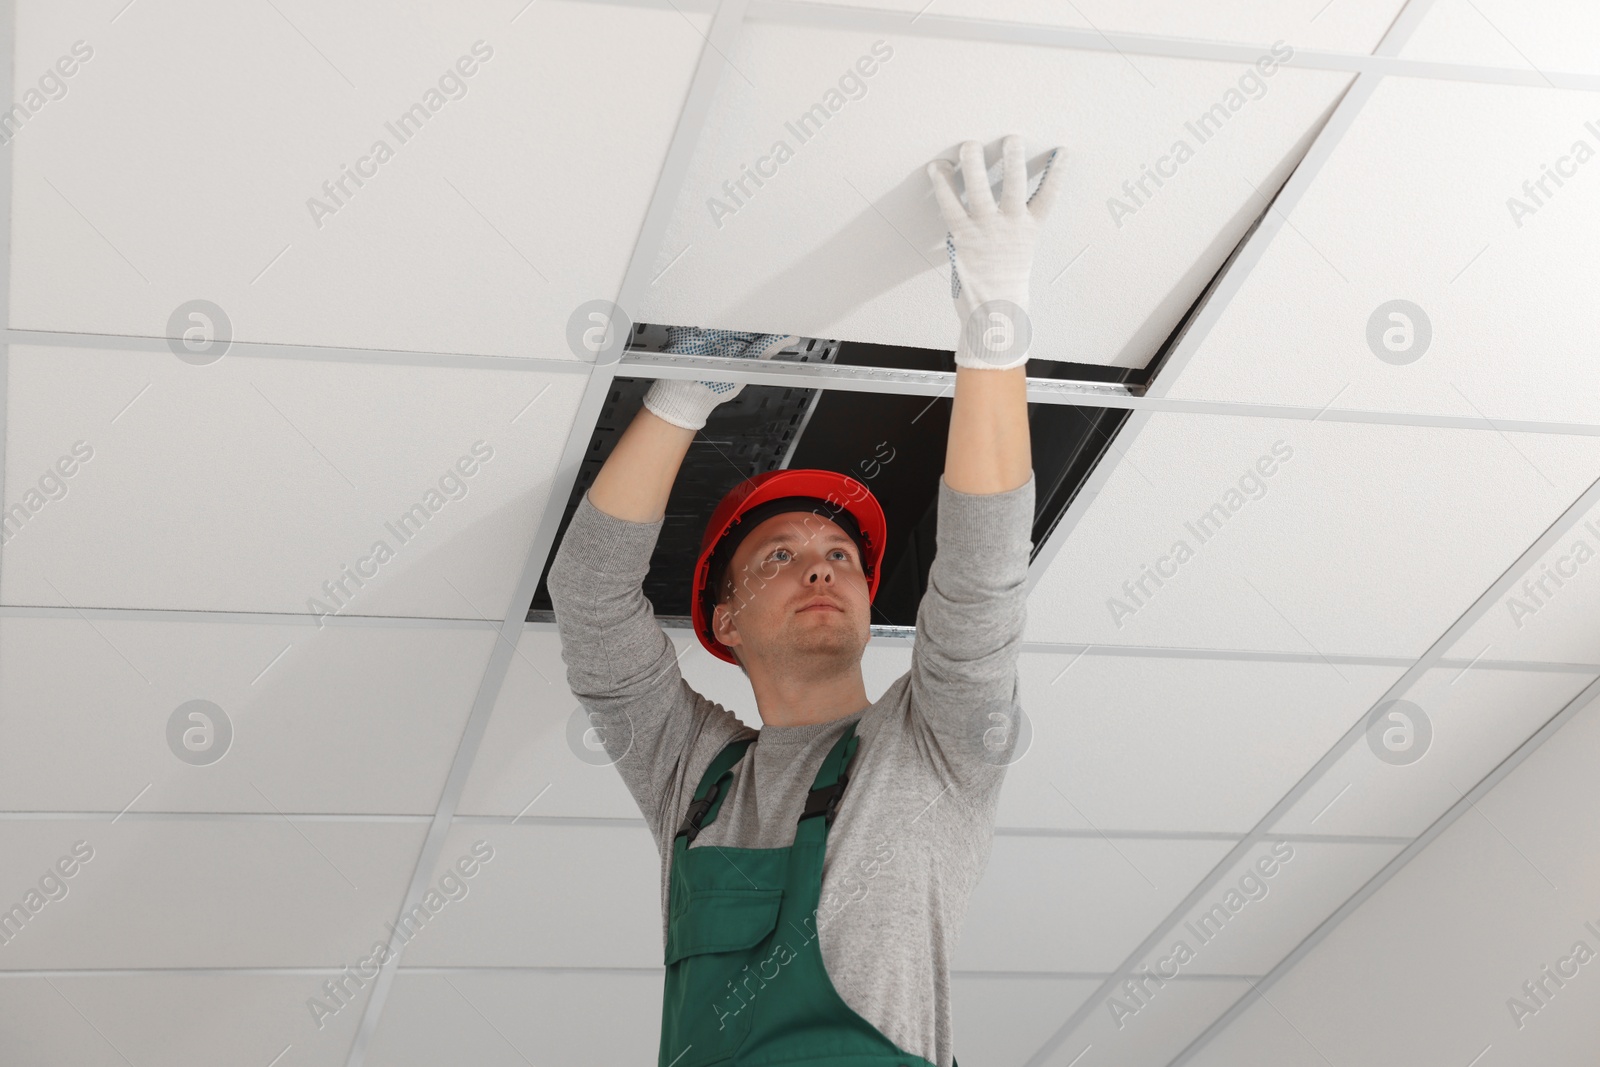 Photo of Suspended ceiling installation. Builder working with PVC tile